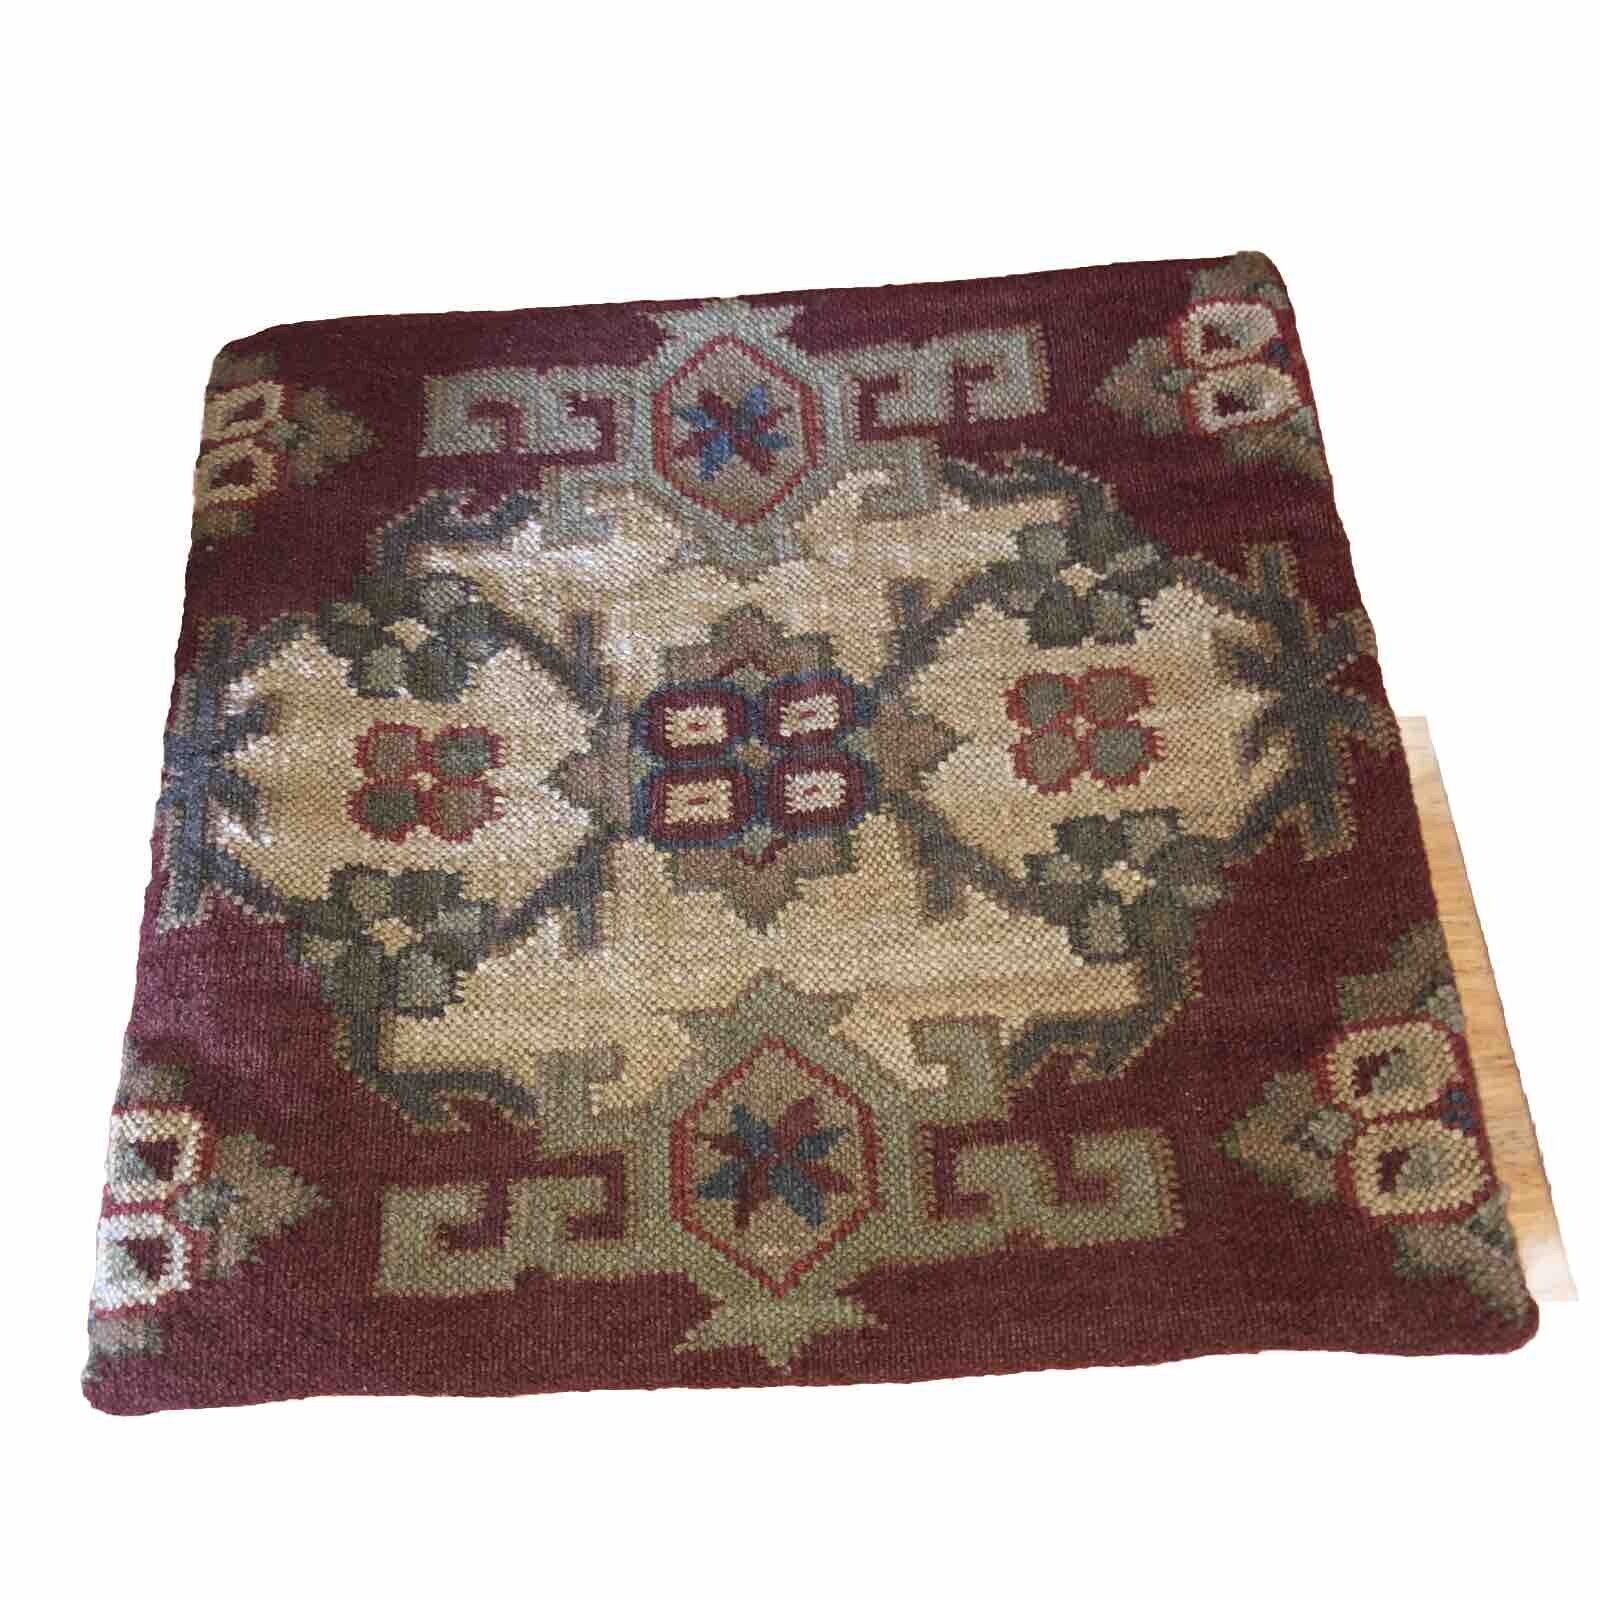 VTG Pottery Barn Kilim Wool/Cotton Multicolor 18” Square Pillow Cover #3 Nice